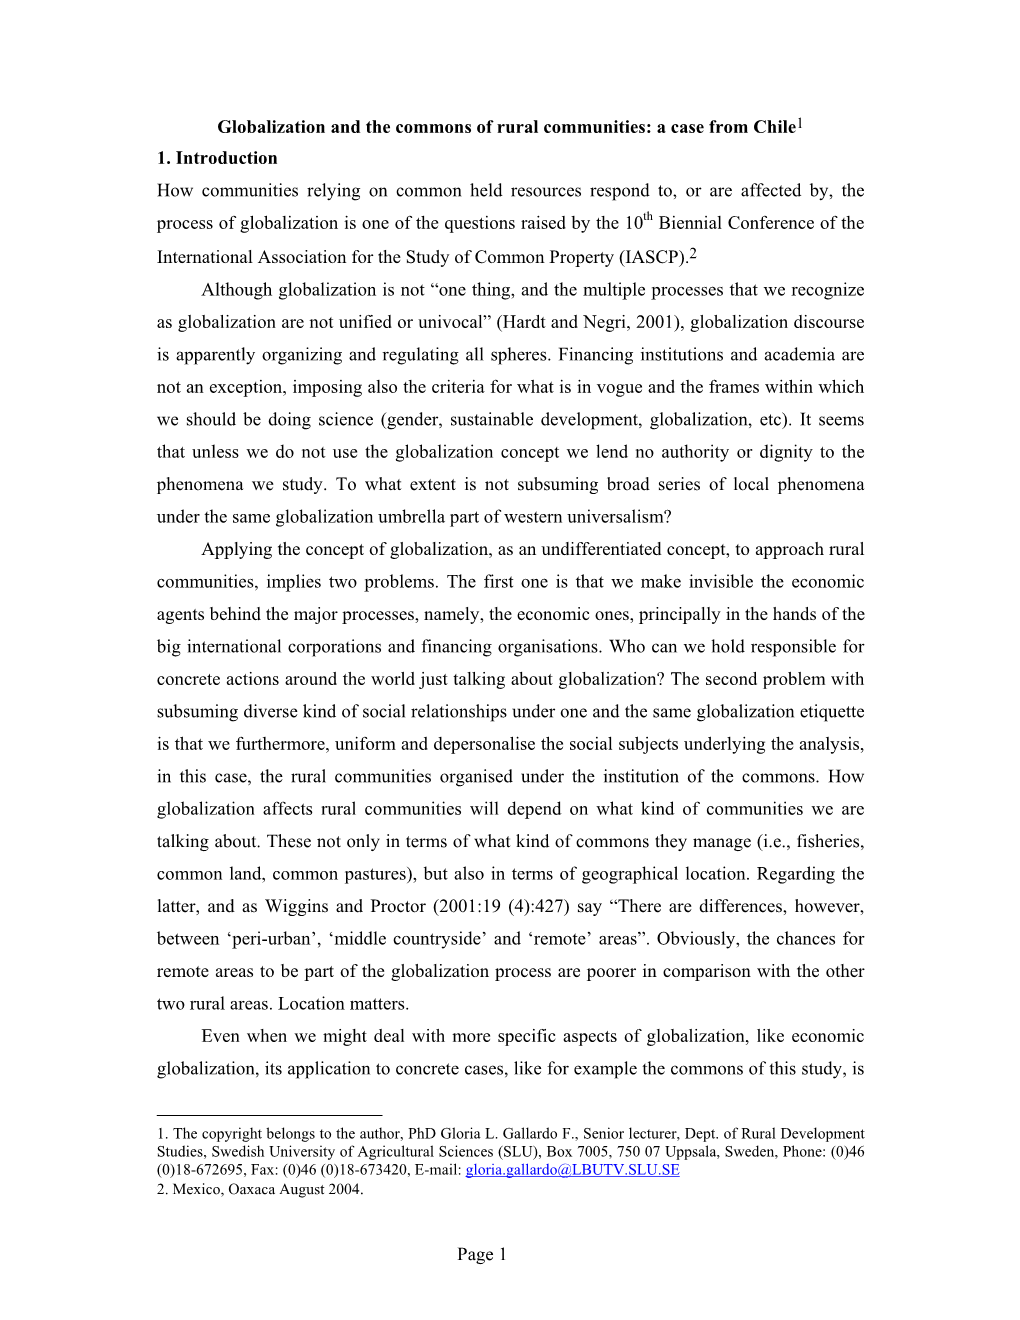 Page 1 Globalization and the Commons of Rural Communities: a Case from Chile1 1. Introduction How Communities Relying on Common